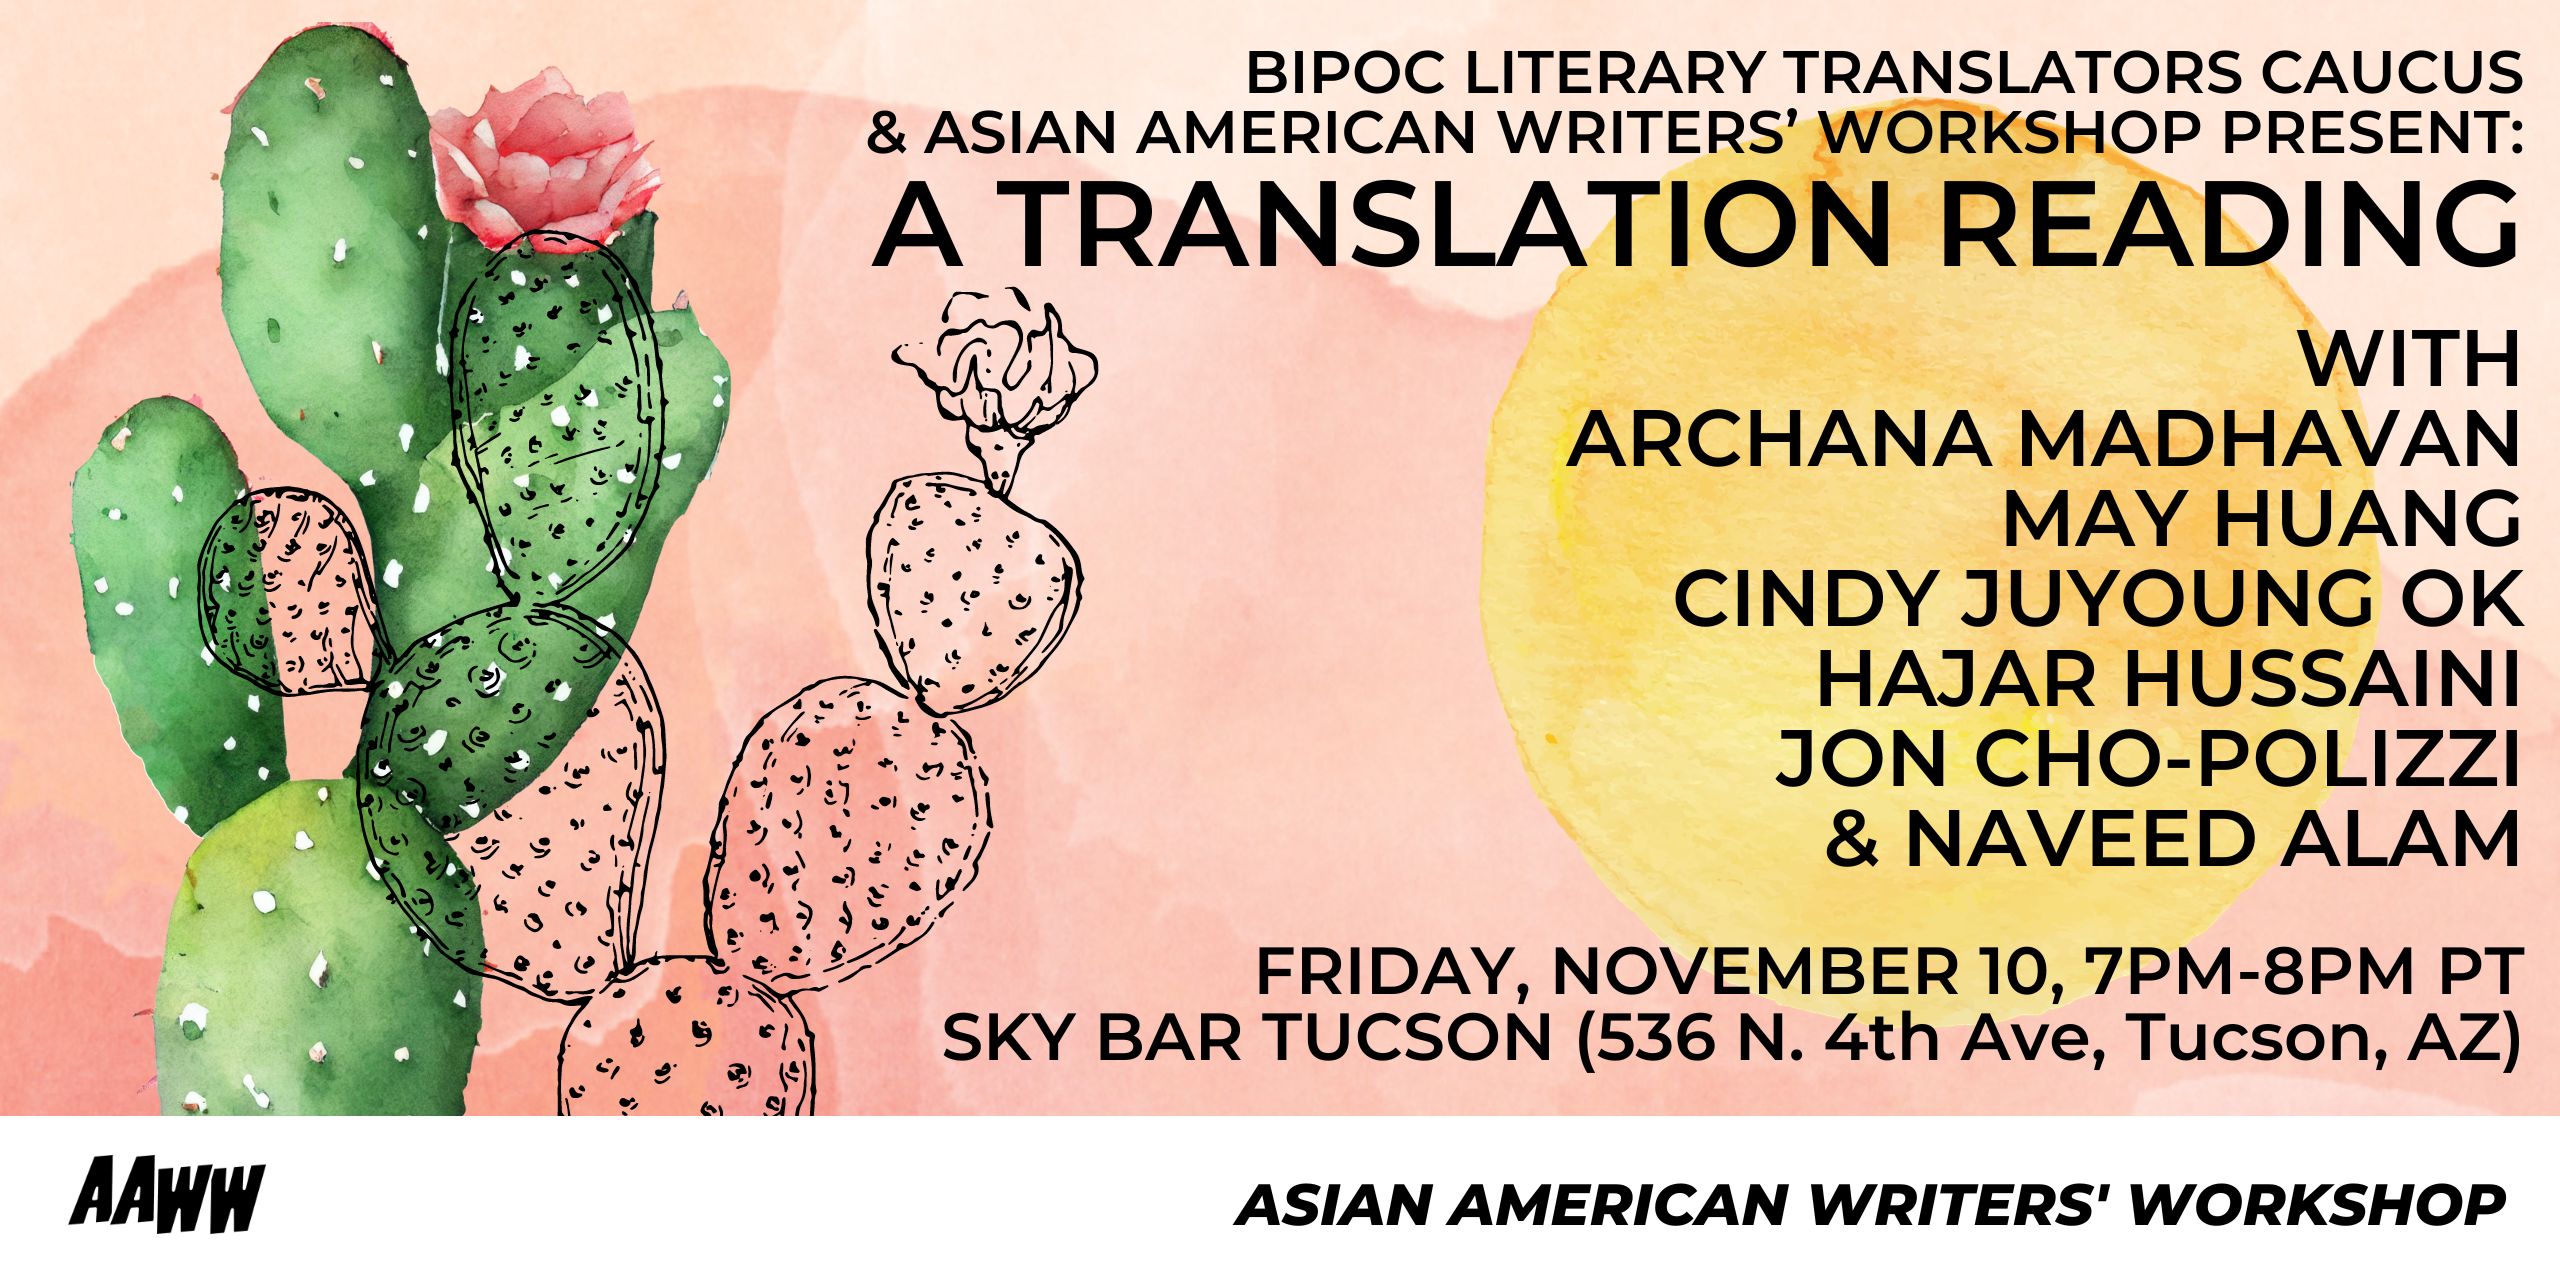 [In-Person] BIPOC Literary Translators Caucus & AAWW Present: A Translation Reading